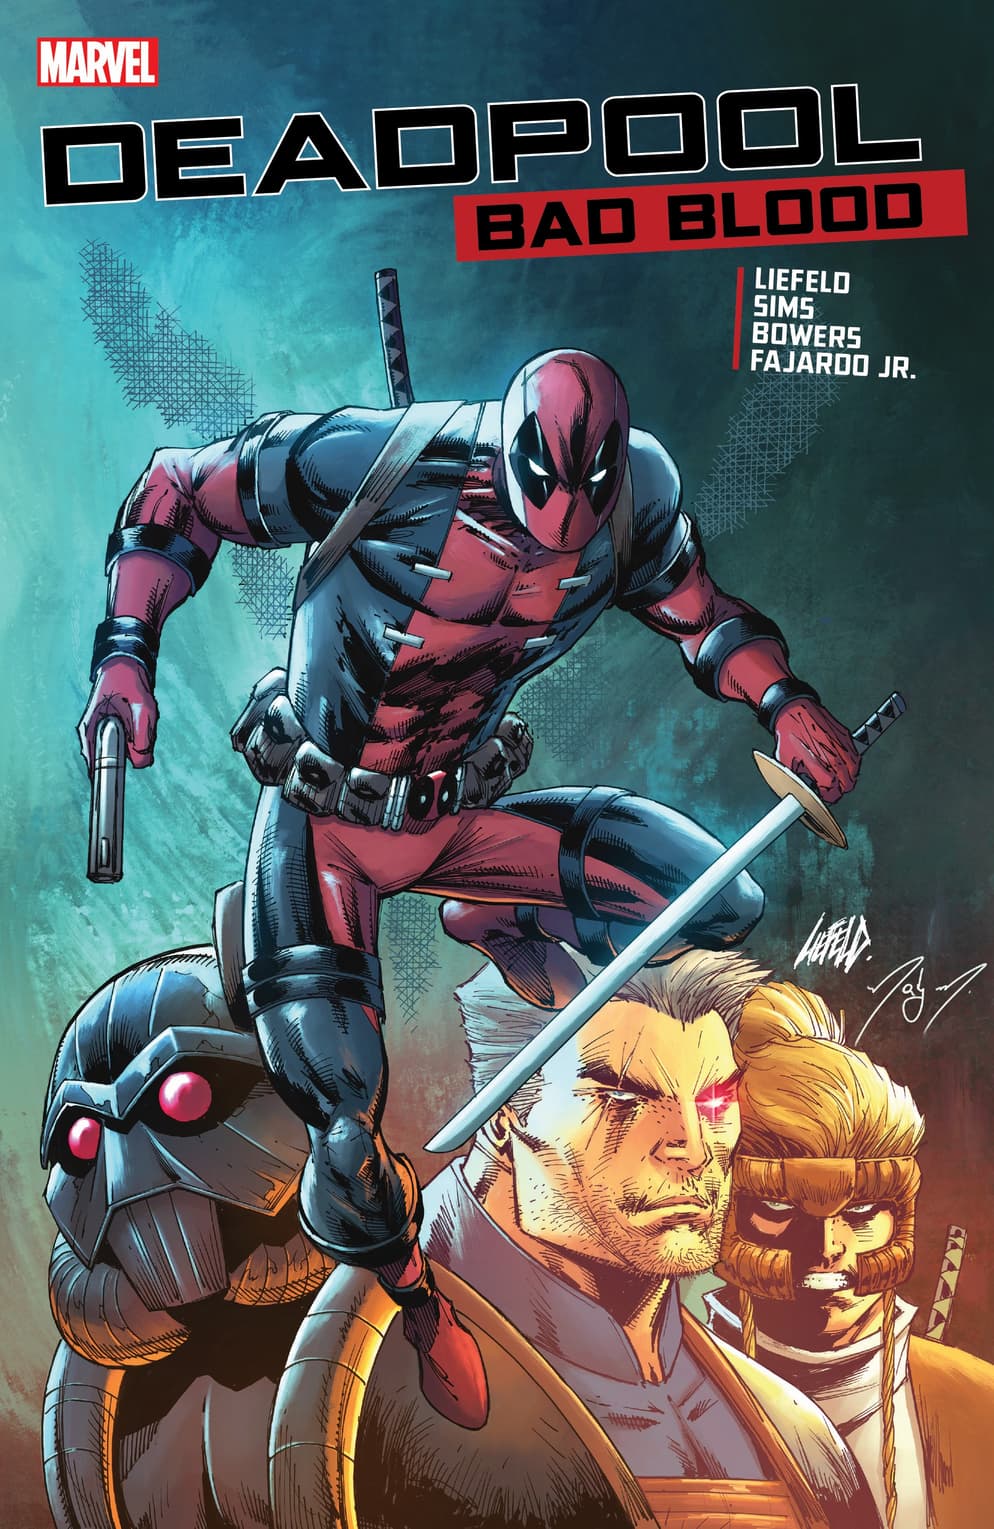 DEADPOOL: BAD BLOOD cover by Rob Liefeld